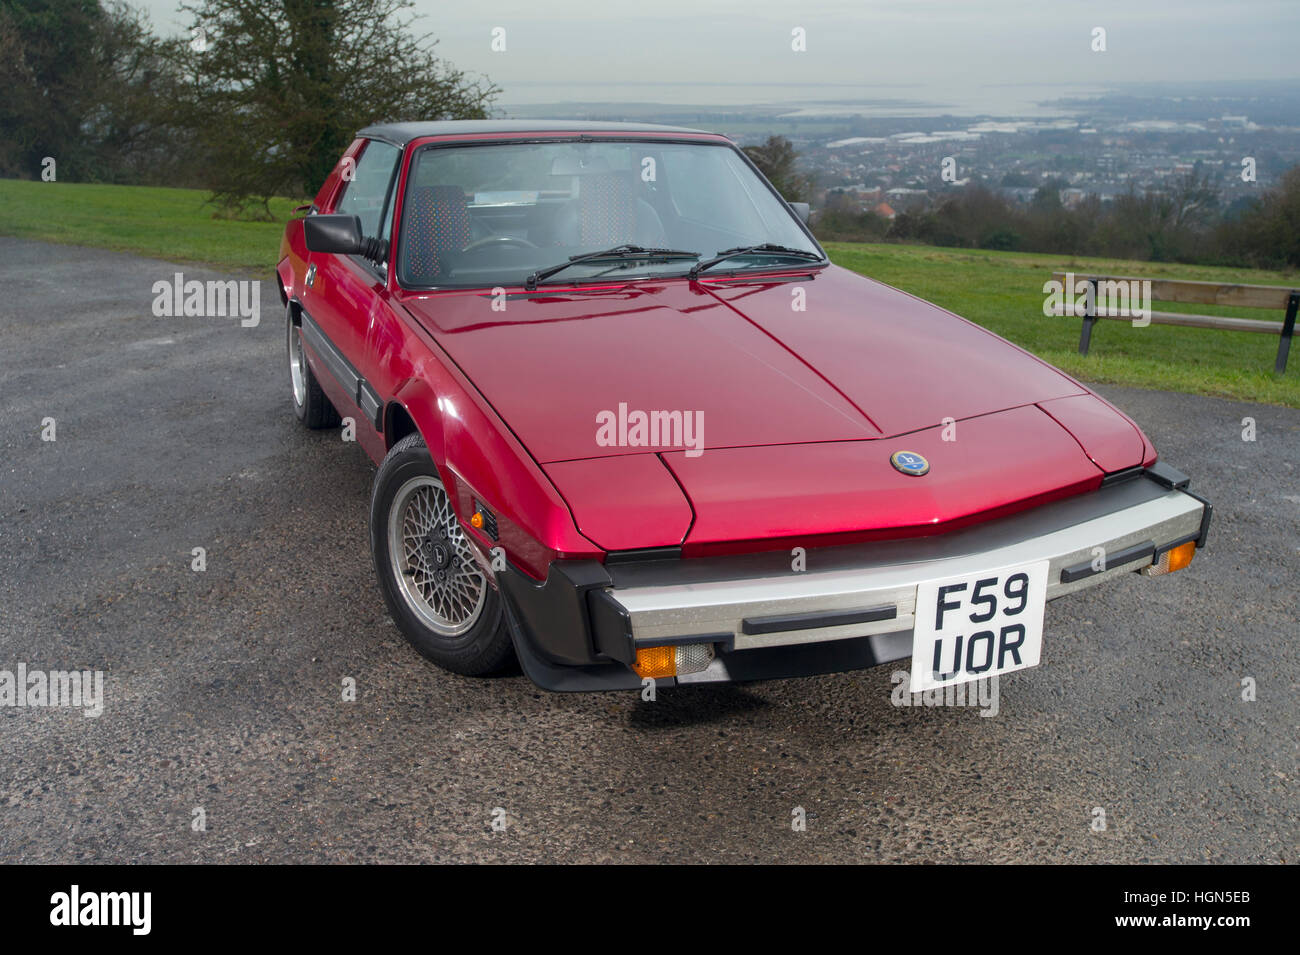 1988 Fiat X1/9 mid engined sports car, designed by Bertone Stock Photo